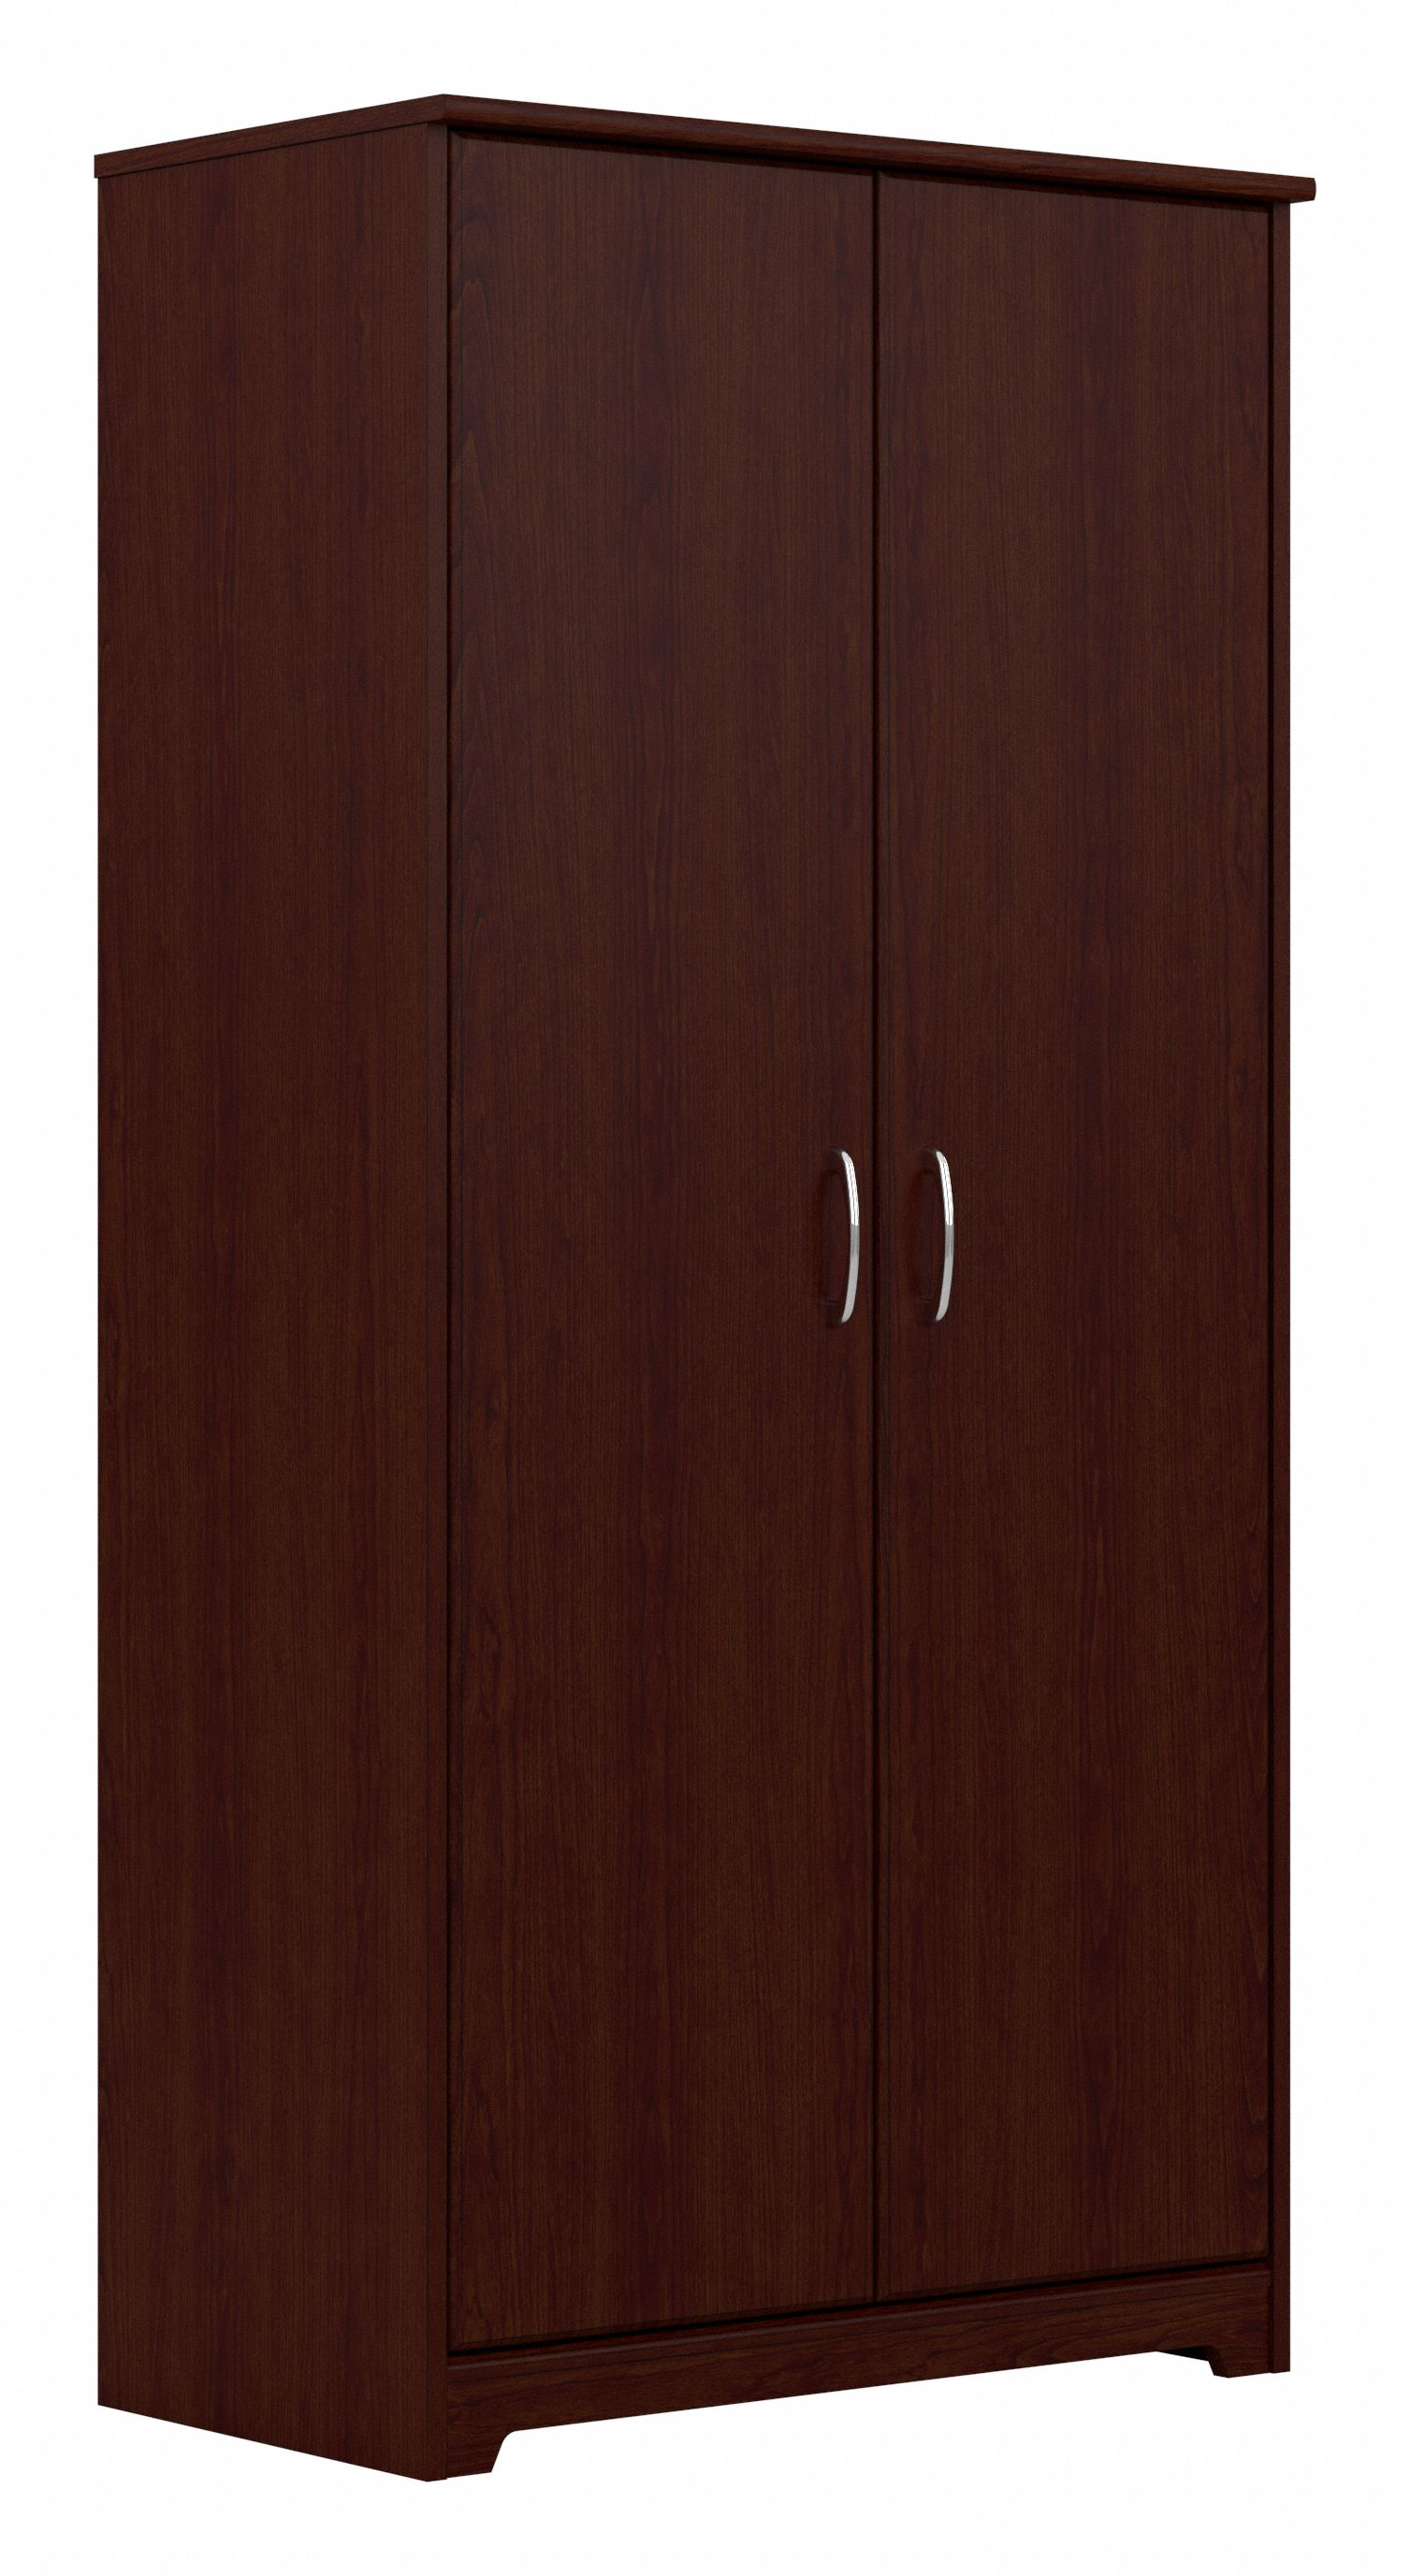 Shop Bush Furniture Cabot Tall Bathroom Storage Cabinet with Doors 02 WC31499-Z1 #color_harvest cherry